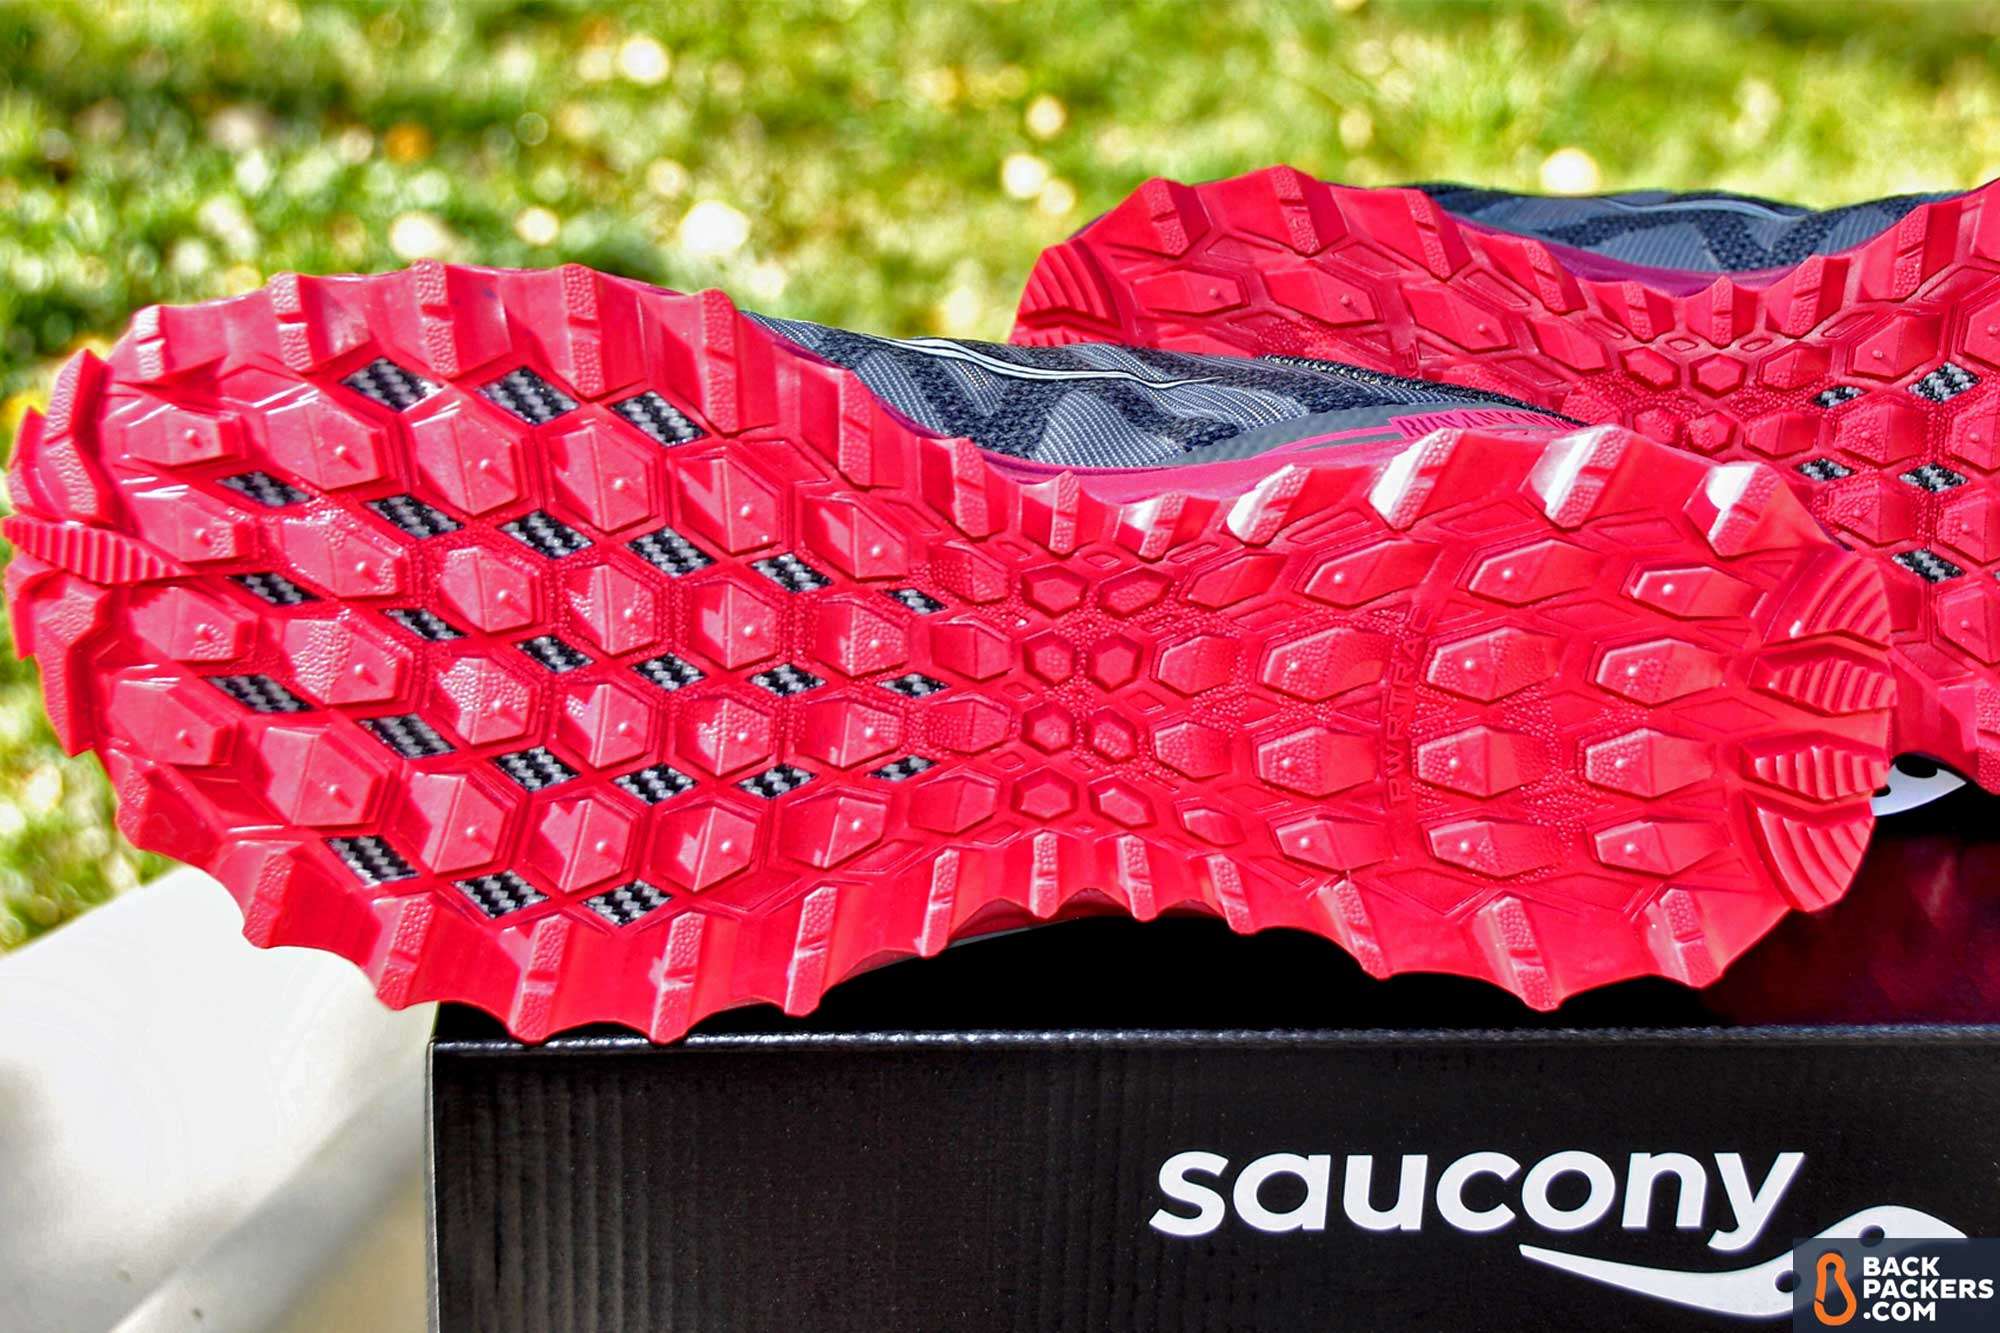 saucony peregrine 7 backpacking